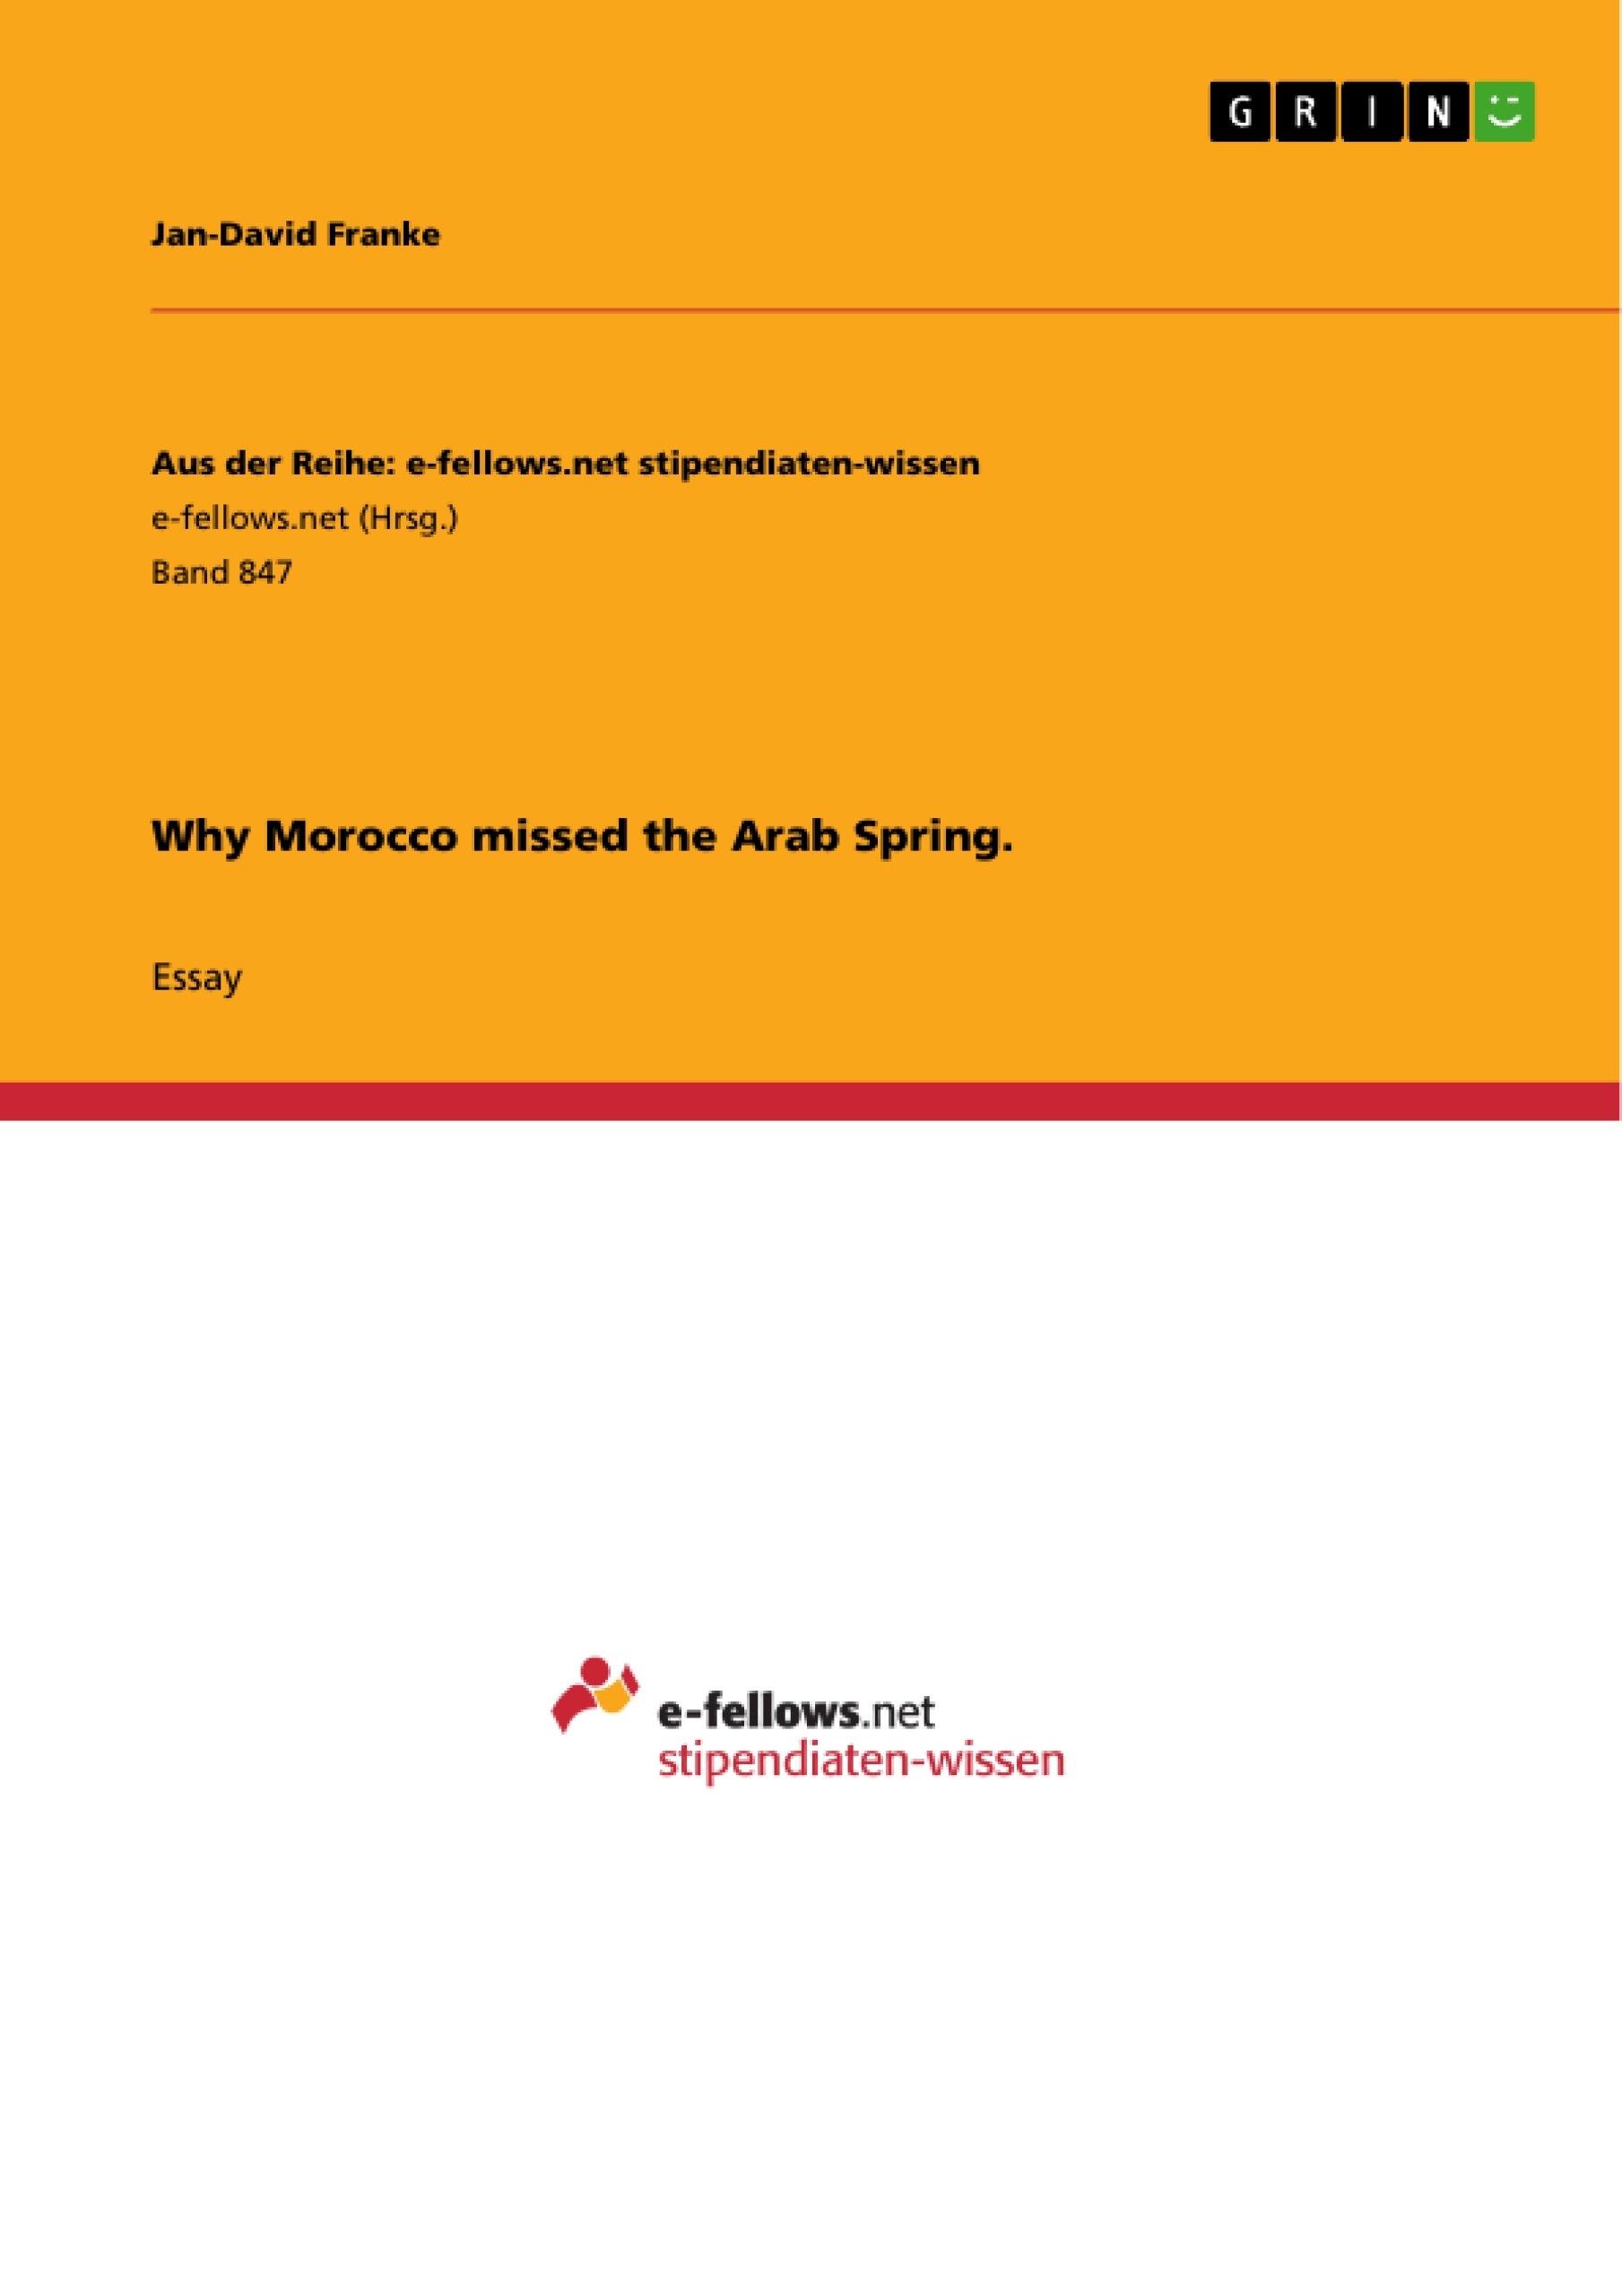 Title: Why Morocco missed the Arab Spring.